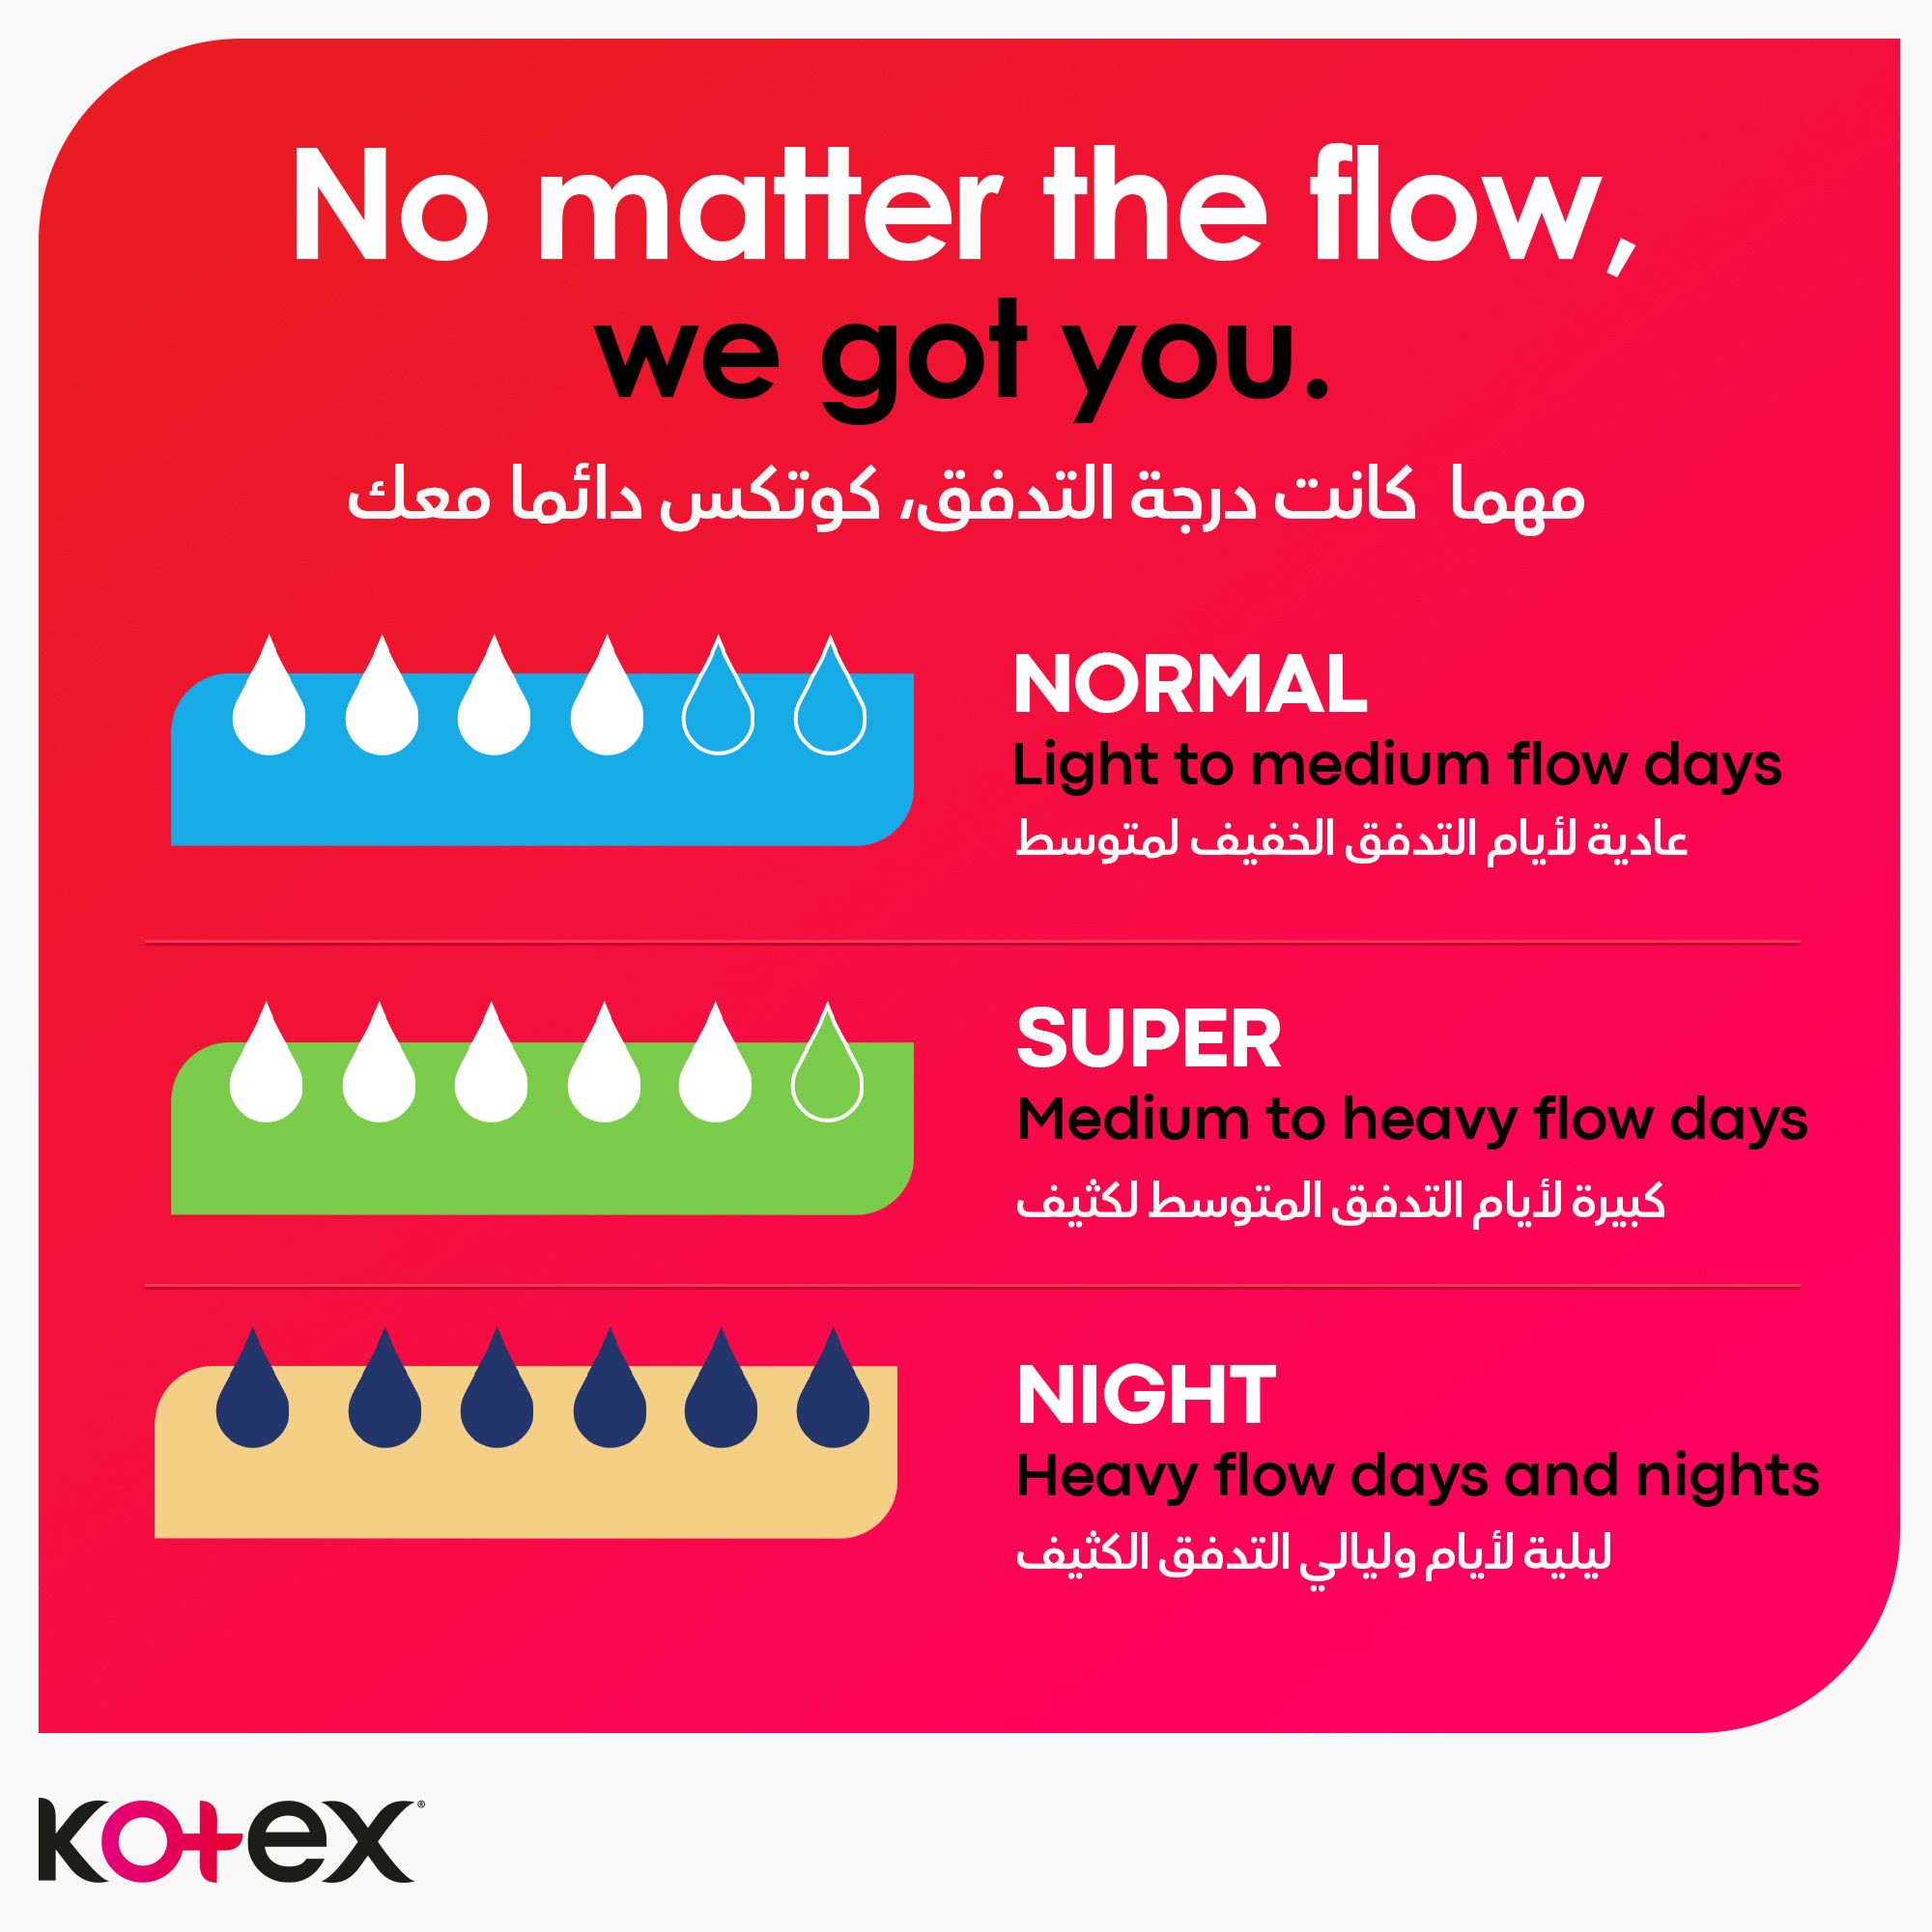 Kotex Ultra Thin Pads, Super Size Sanitary Pads with Wings, 16 Sanitary Pads